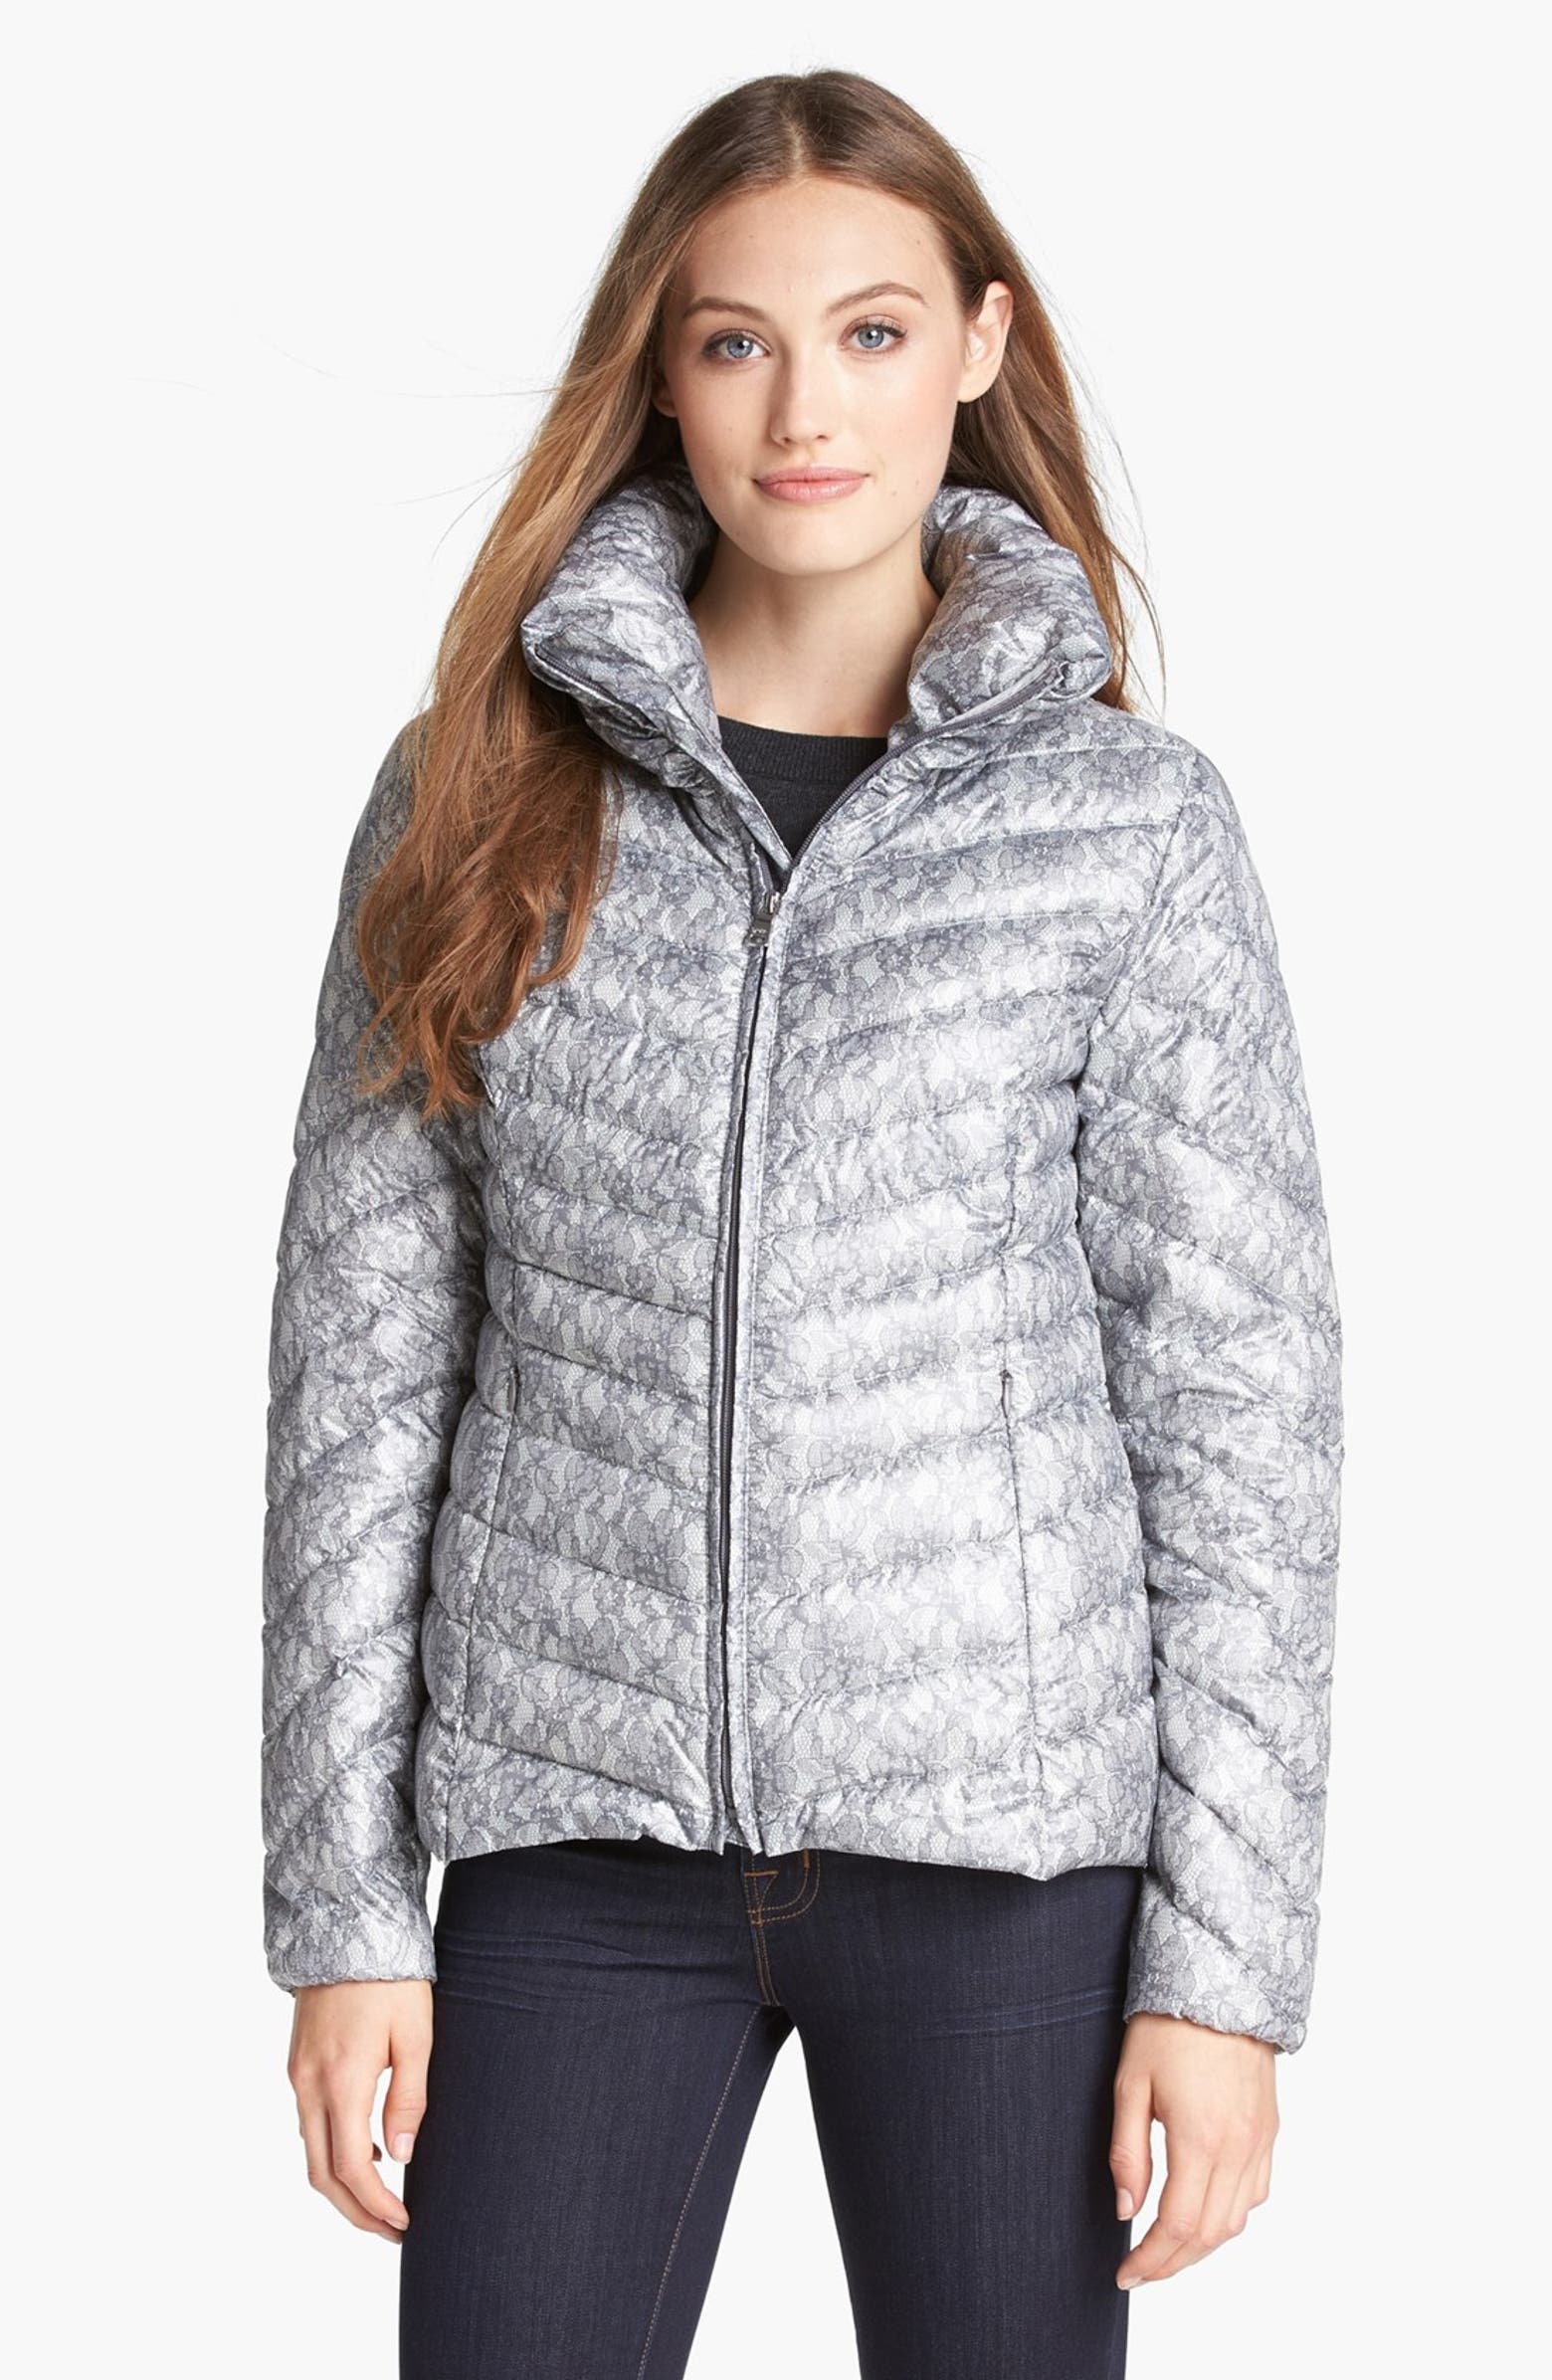 Jessica Simpson Lace Print Packable Down Jacket | Nordstrom